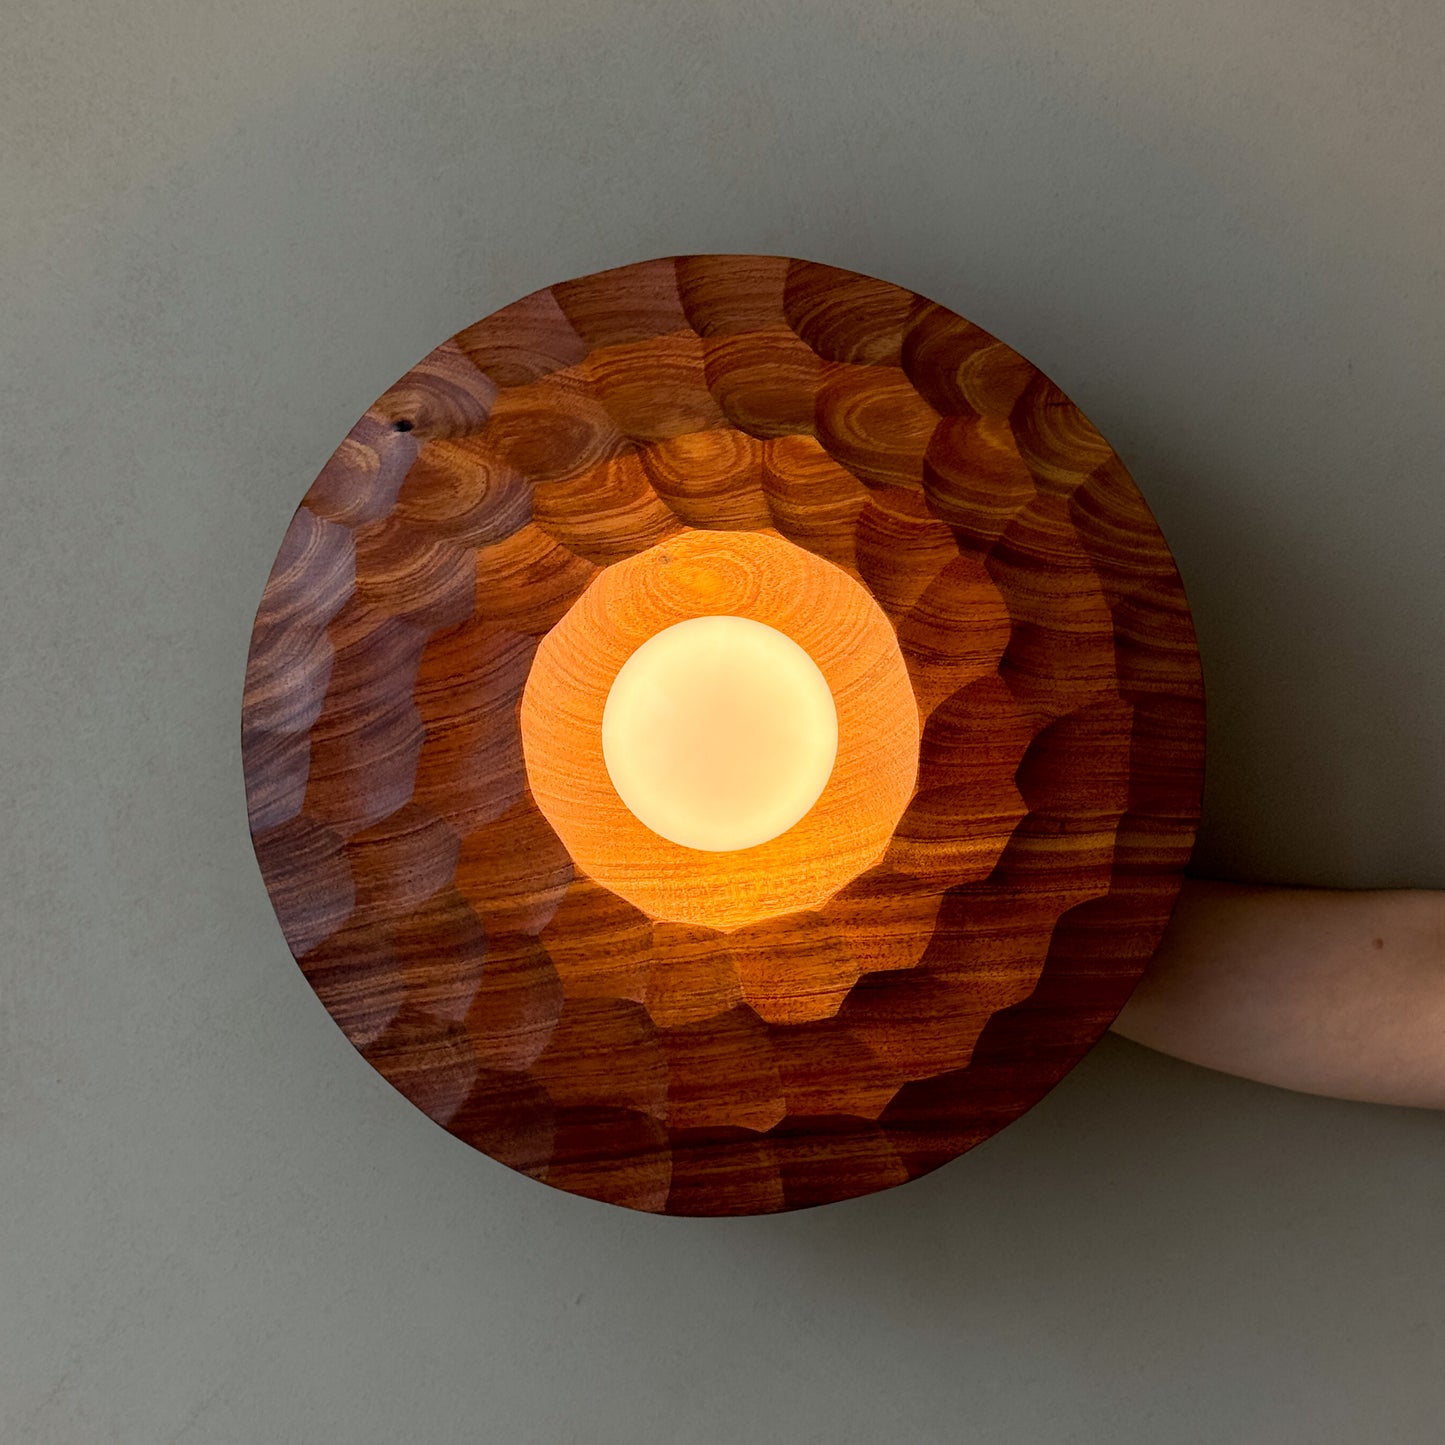 "There is no light without shadow" | Acacia Wall Lamp